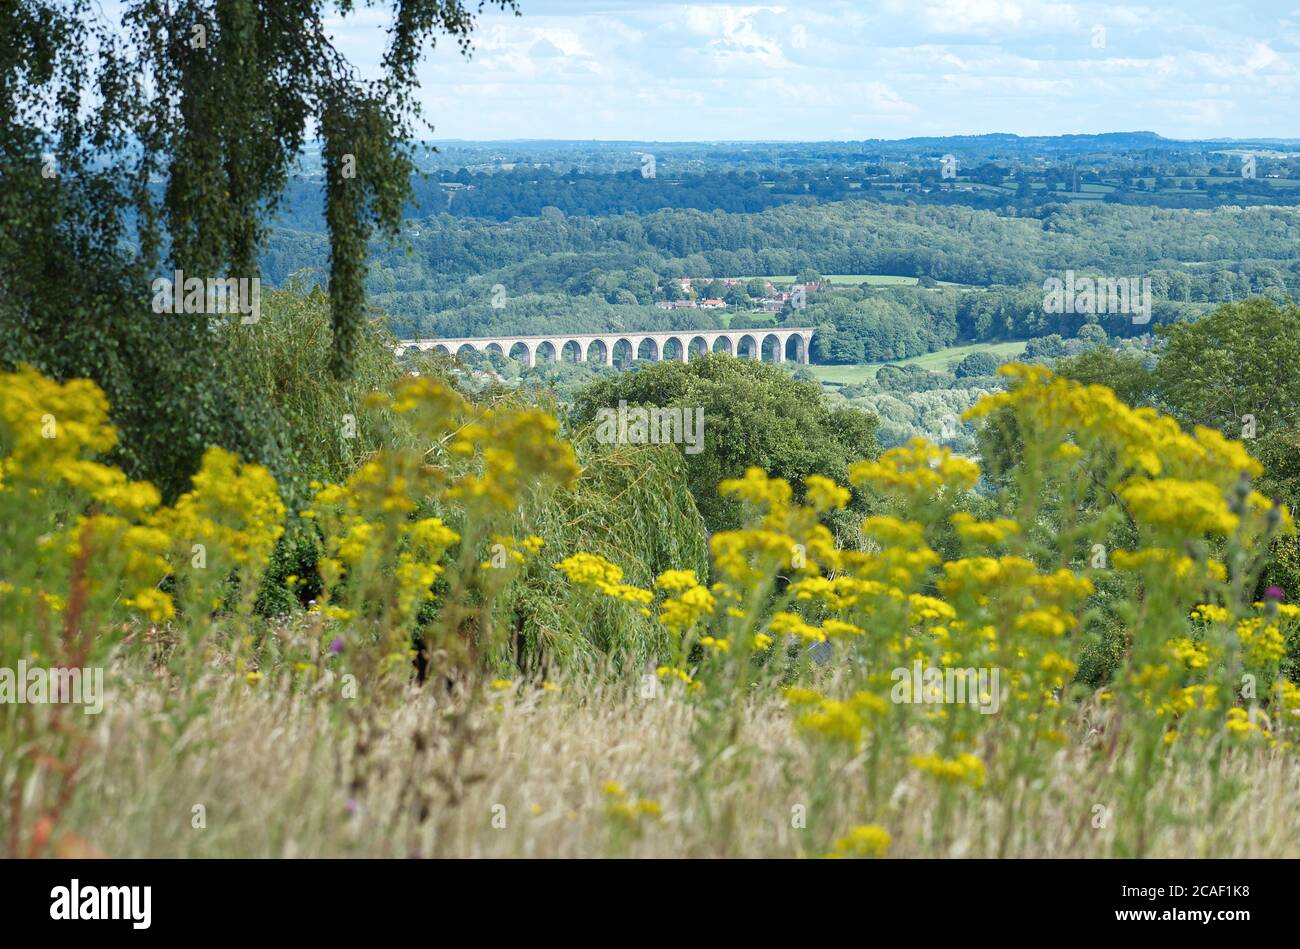 View of Cefn Mawr Viaduct which carries the Chester and Shrewsbury railway over the River Dee between Newbridge and Cefn-Bychan. Stock Photo